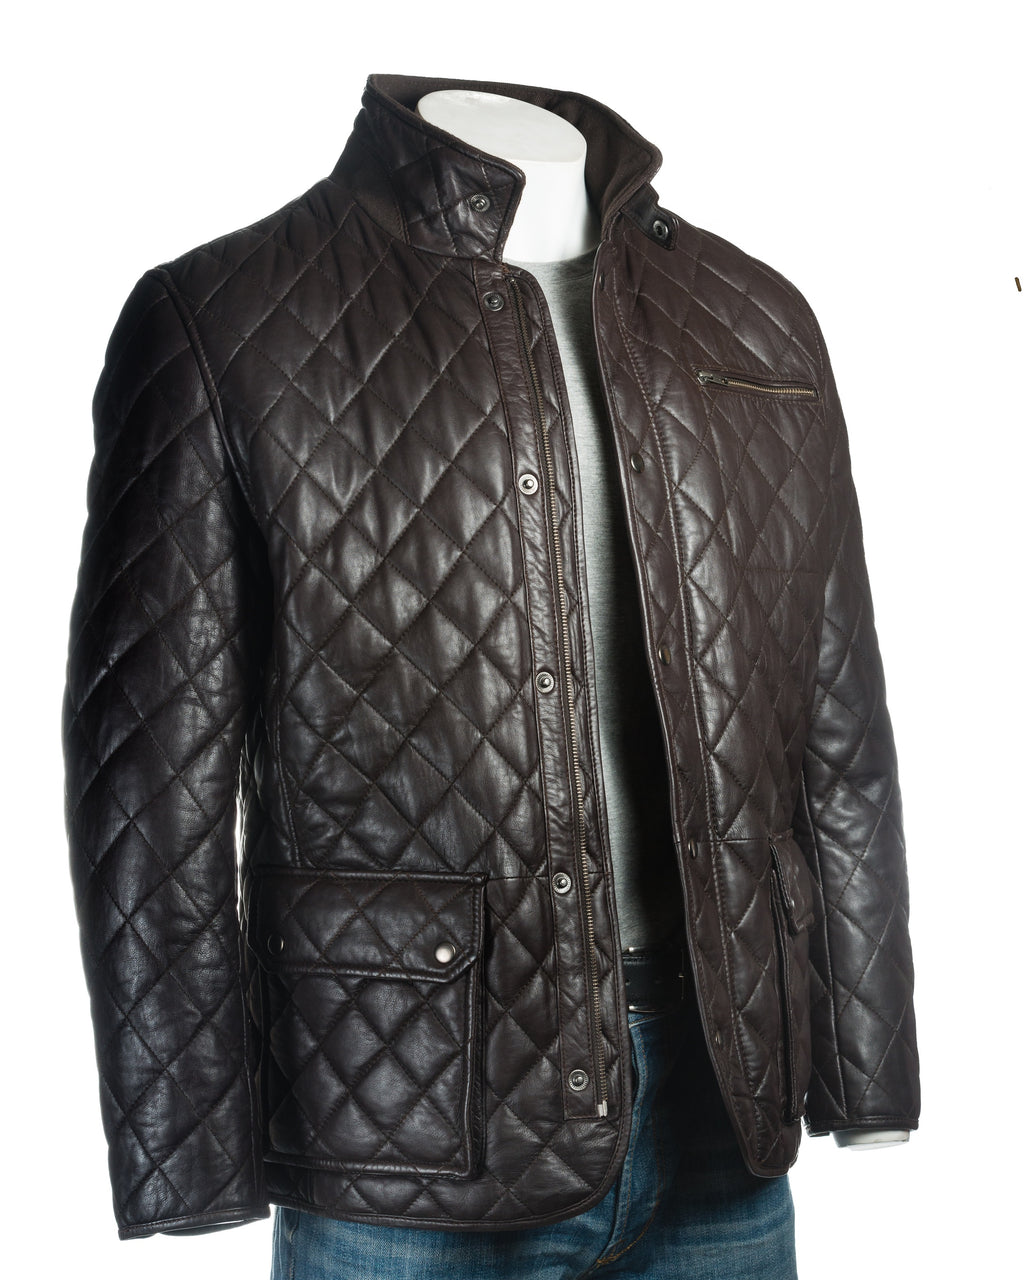 Men's Brown Quilted Leather Coat with Diamond Stitch - Javier